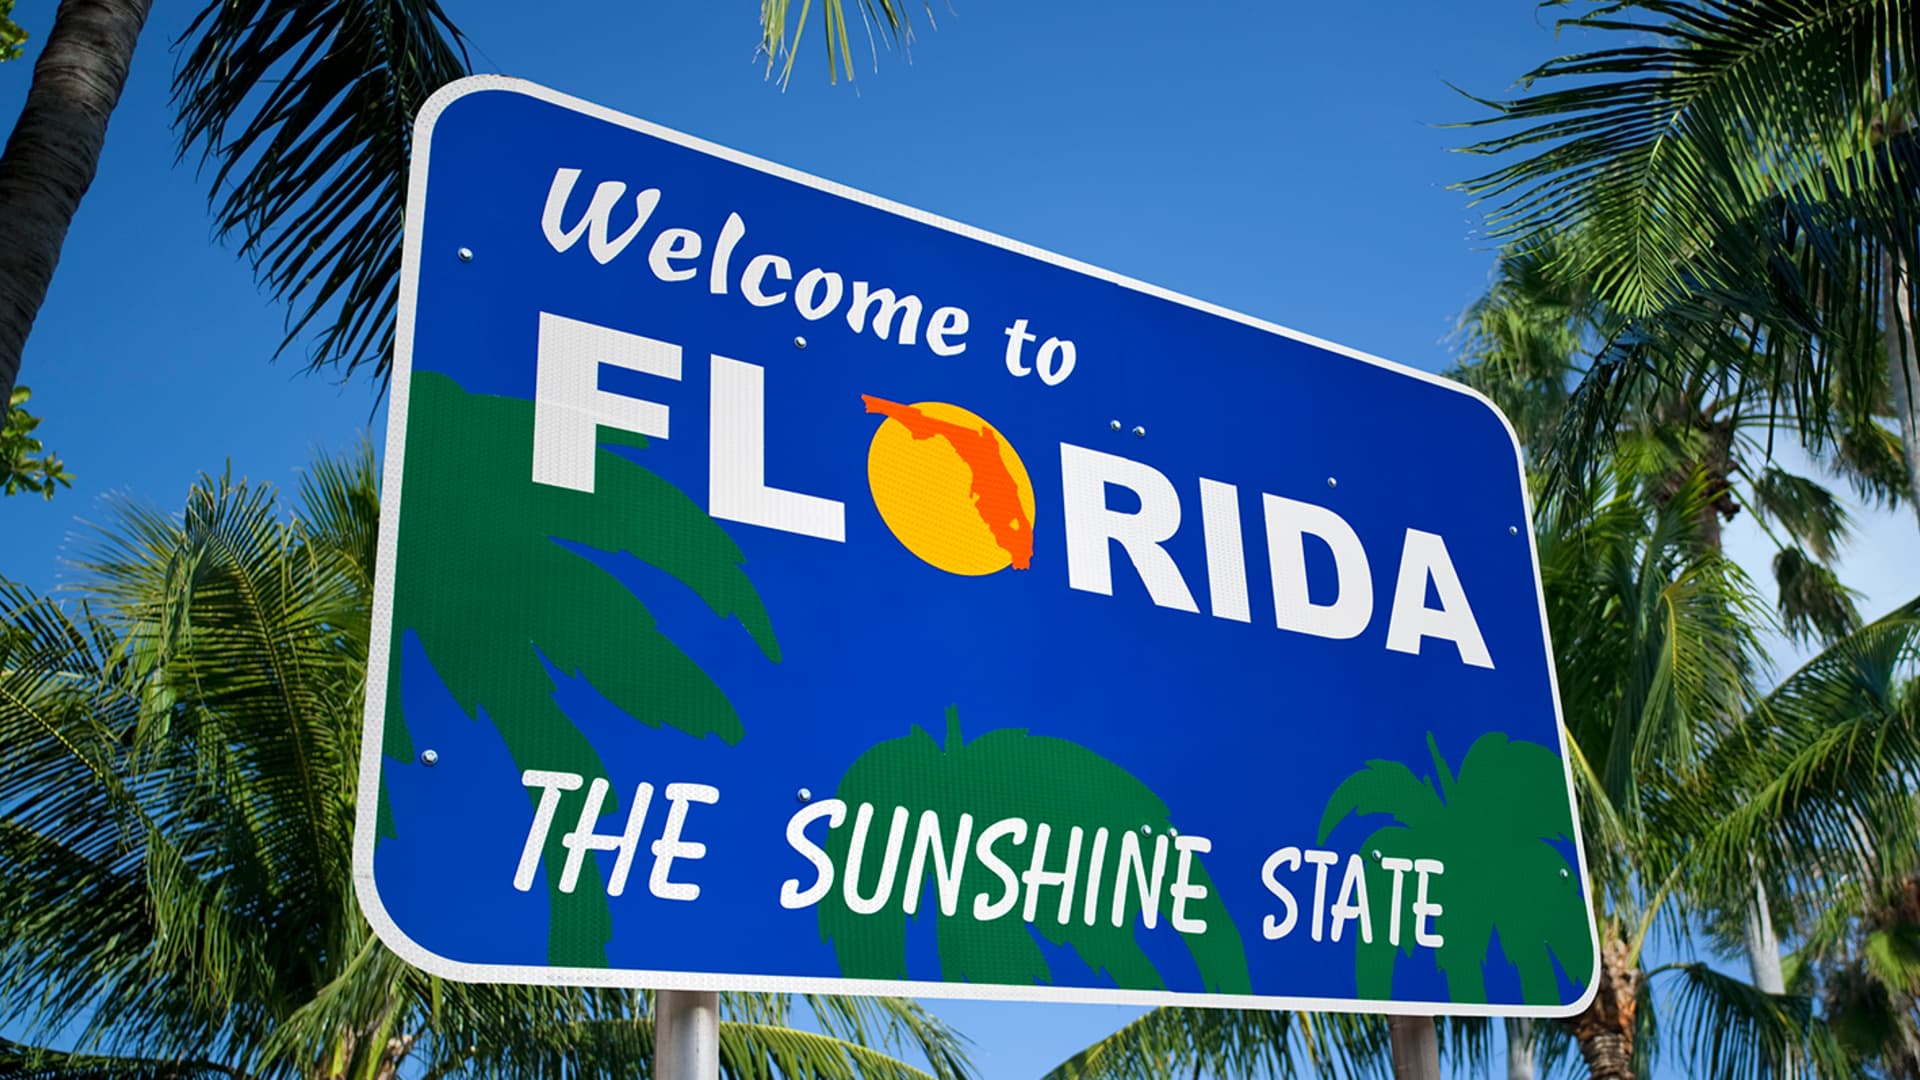 4 of the top 10 best college towns in the U.S. are in Florida—see where else made the list